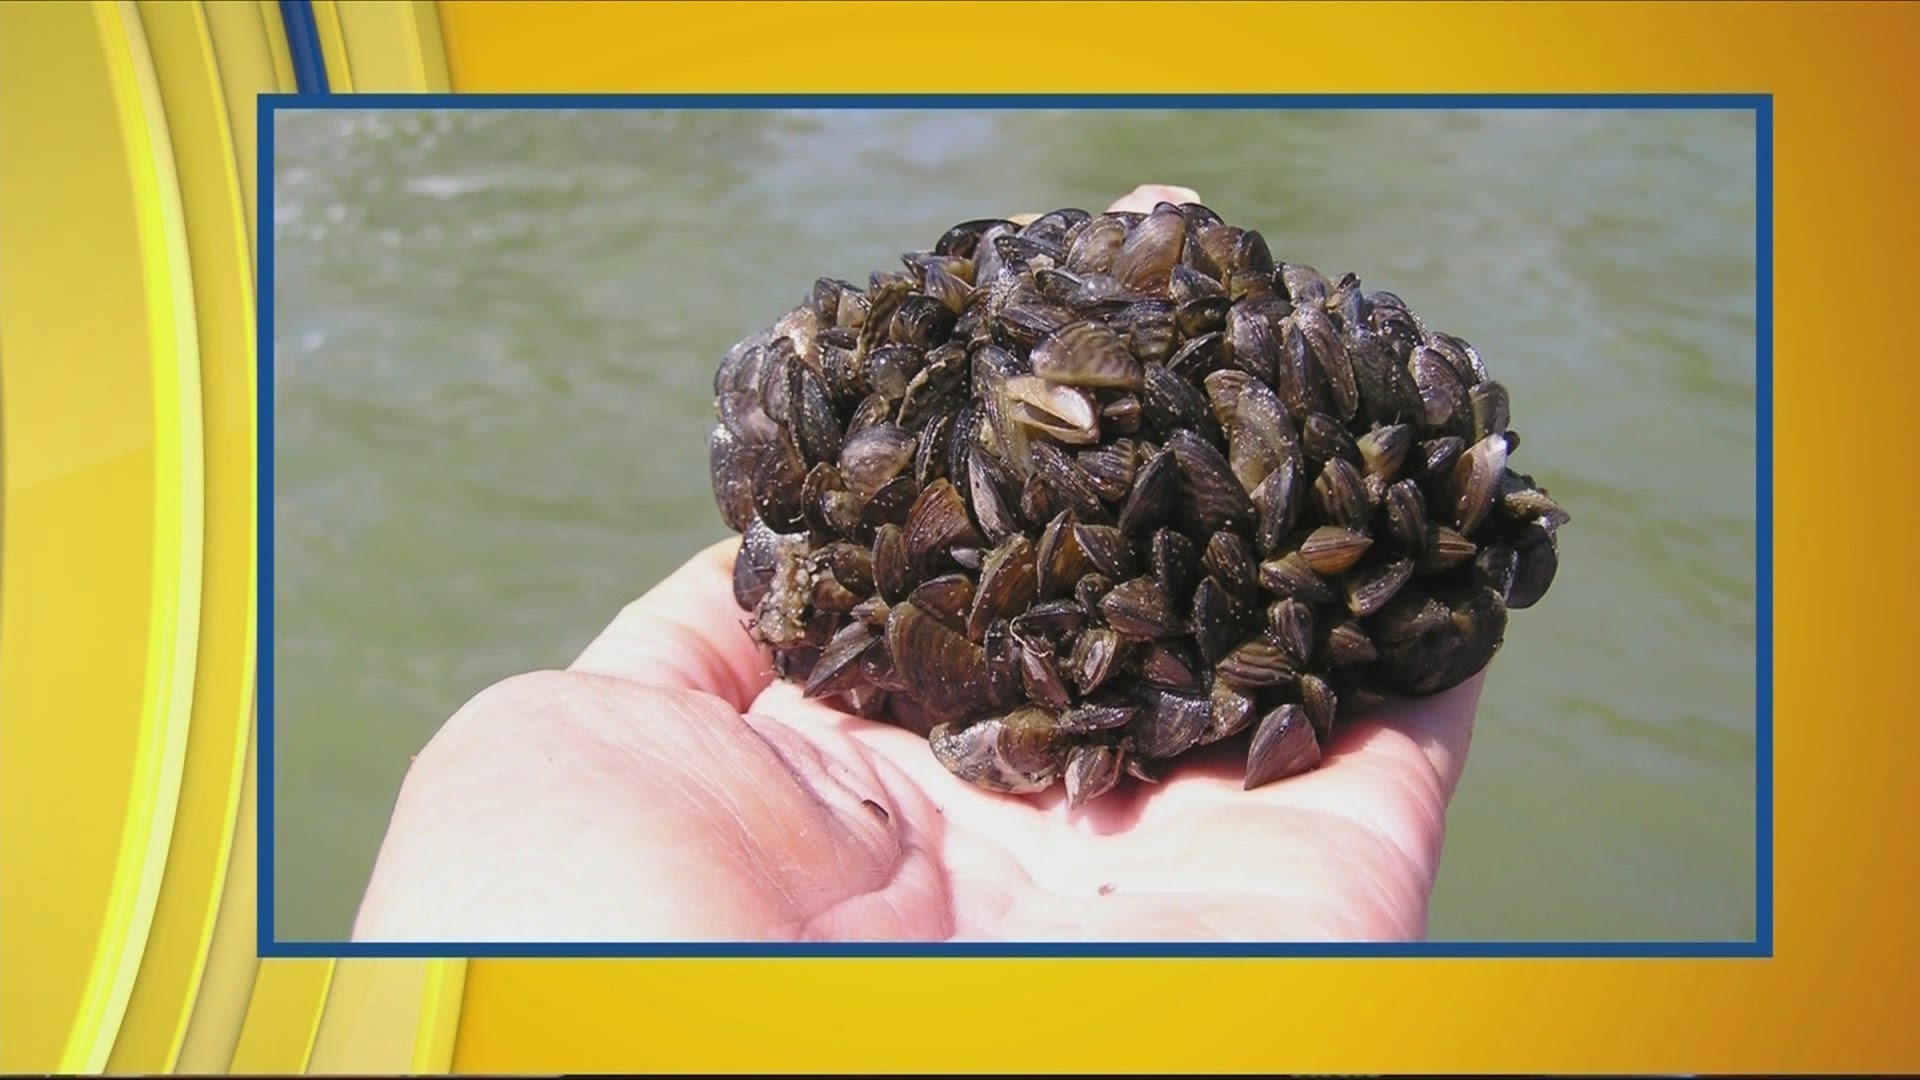 Aquatic invasive species are plants, animals, and invertebrates that not native to Iowa, spread aggressively, and cause harm to our waters and us